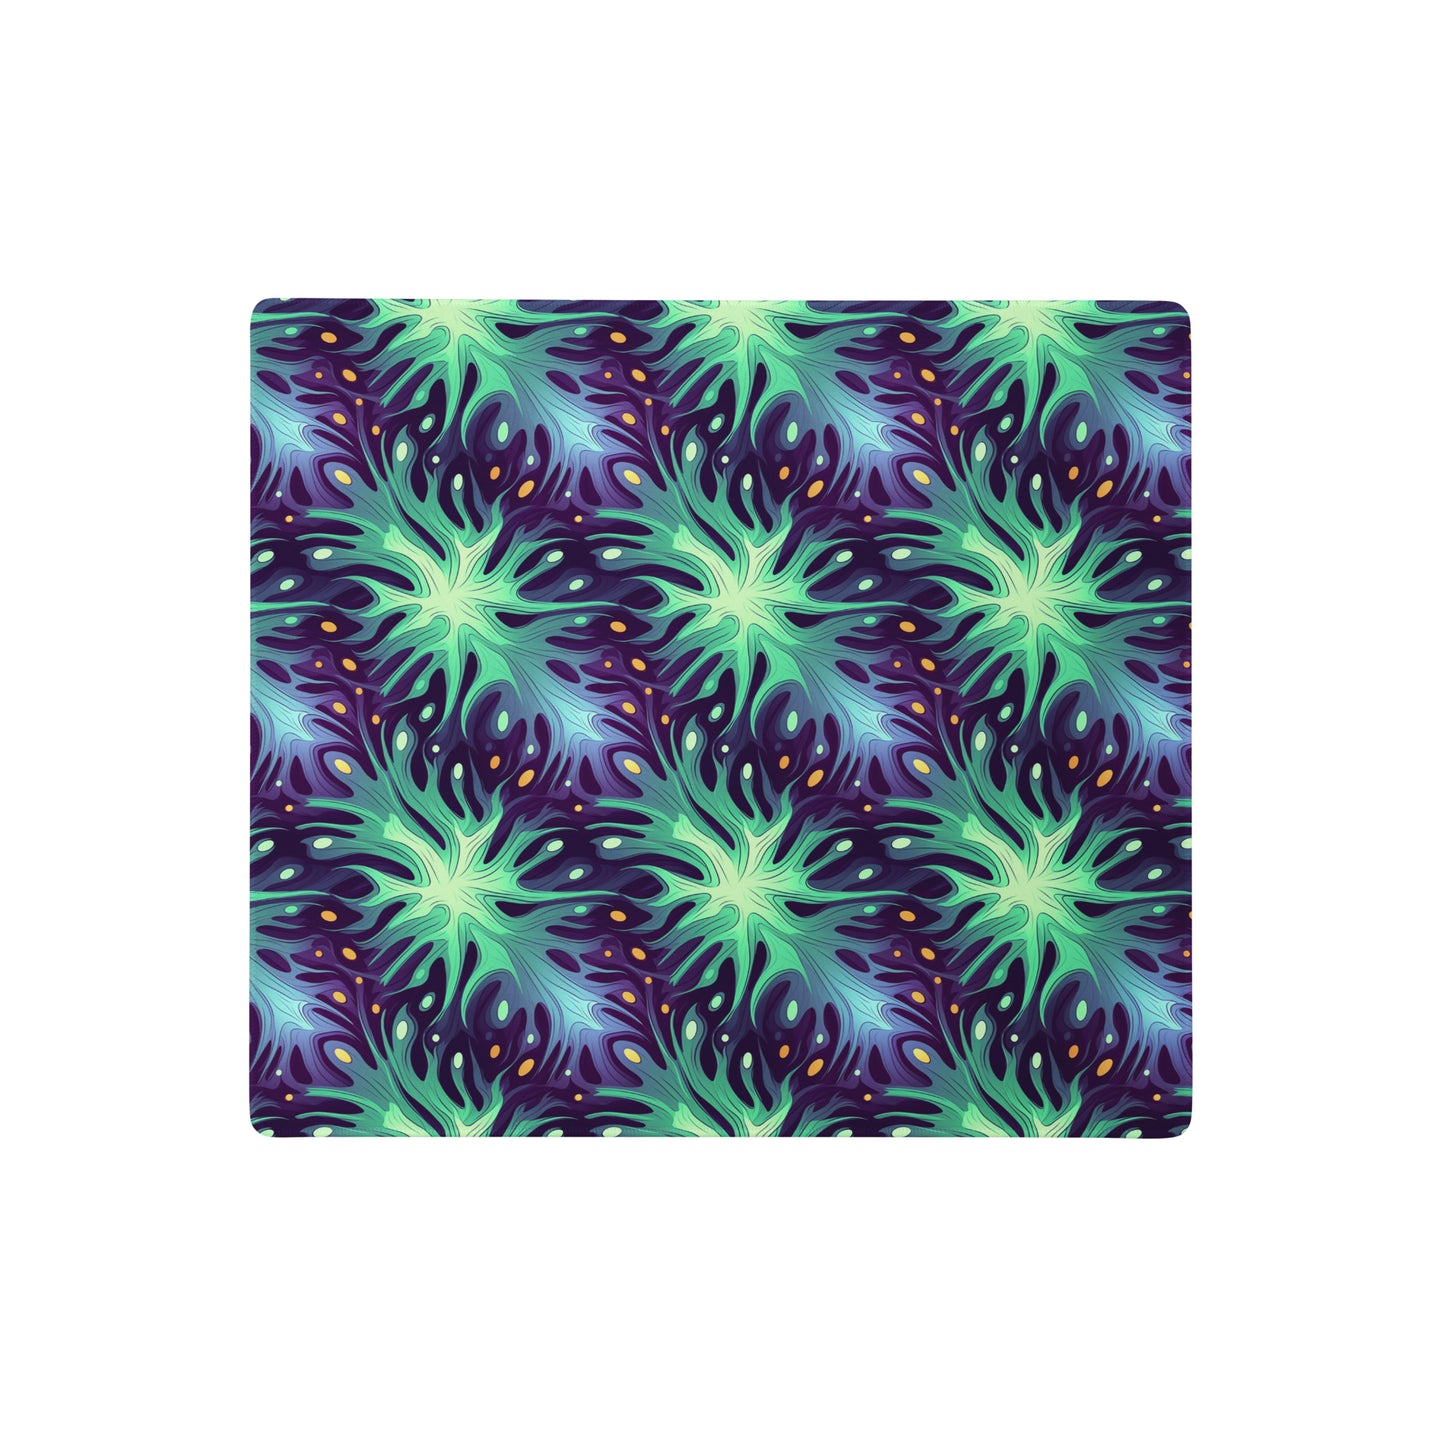 A 18" x 16" desk pad with a green and blue abstract pattern.